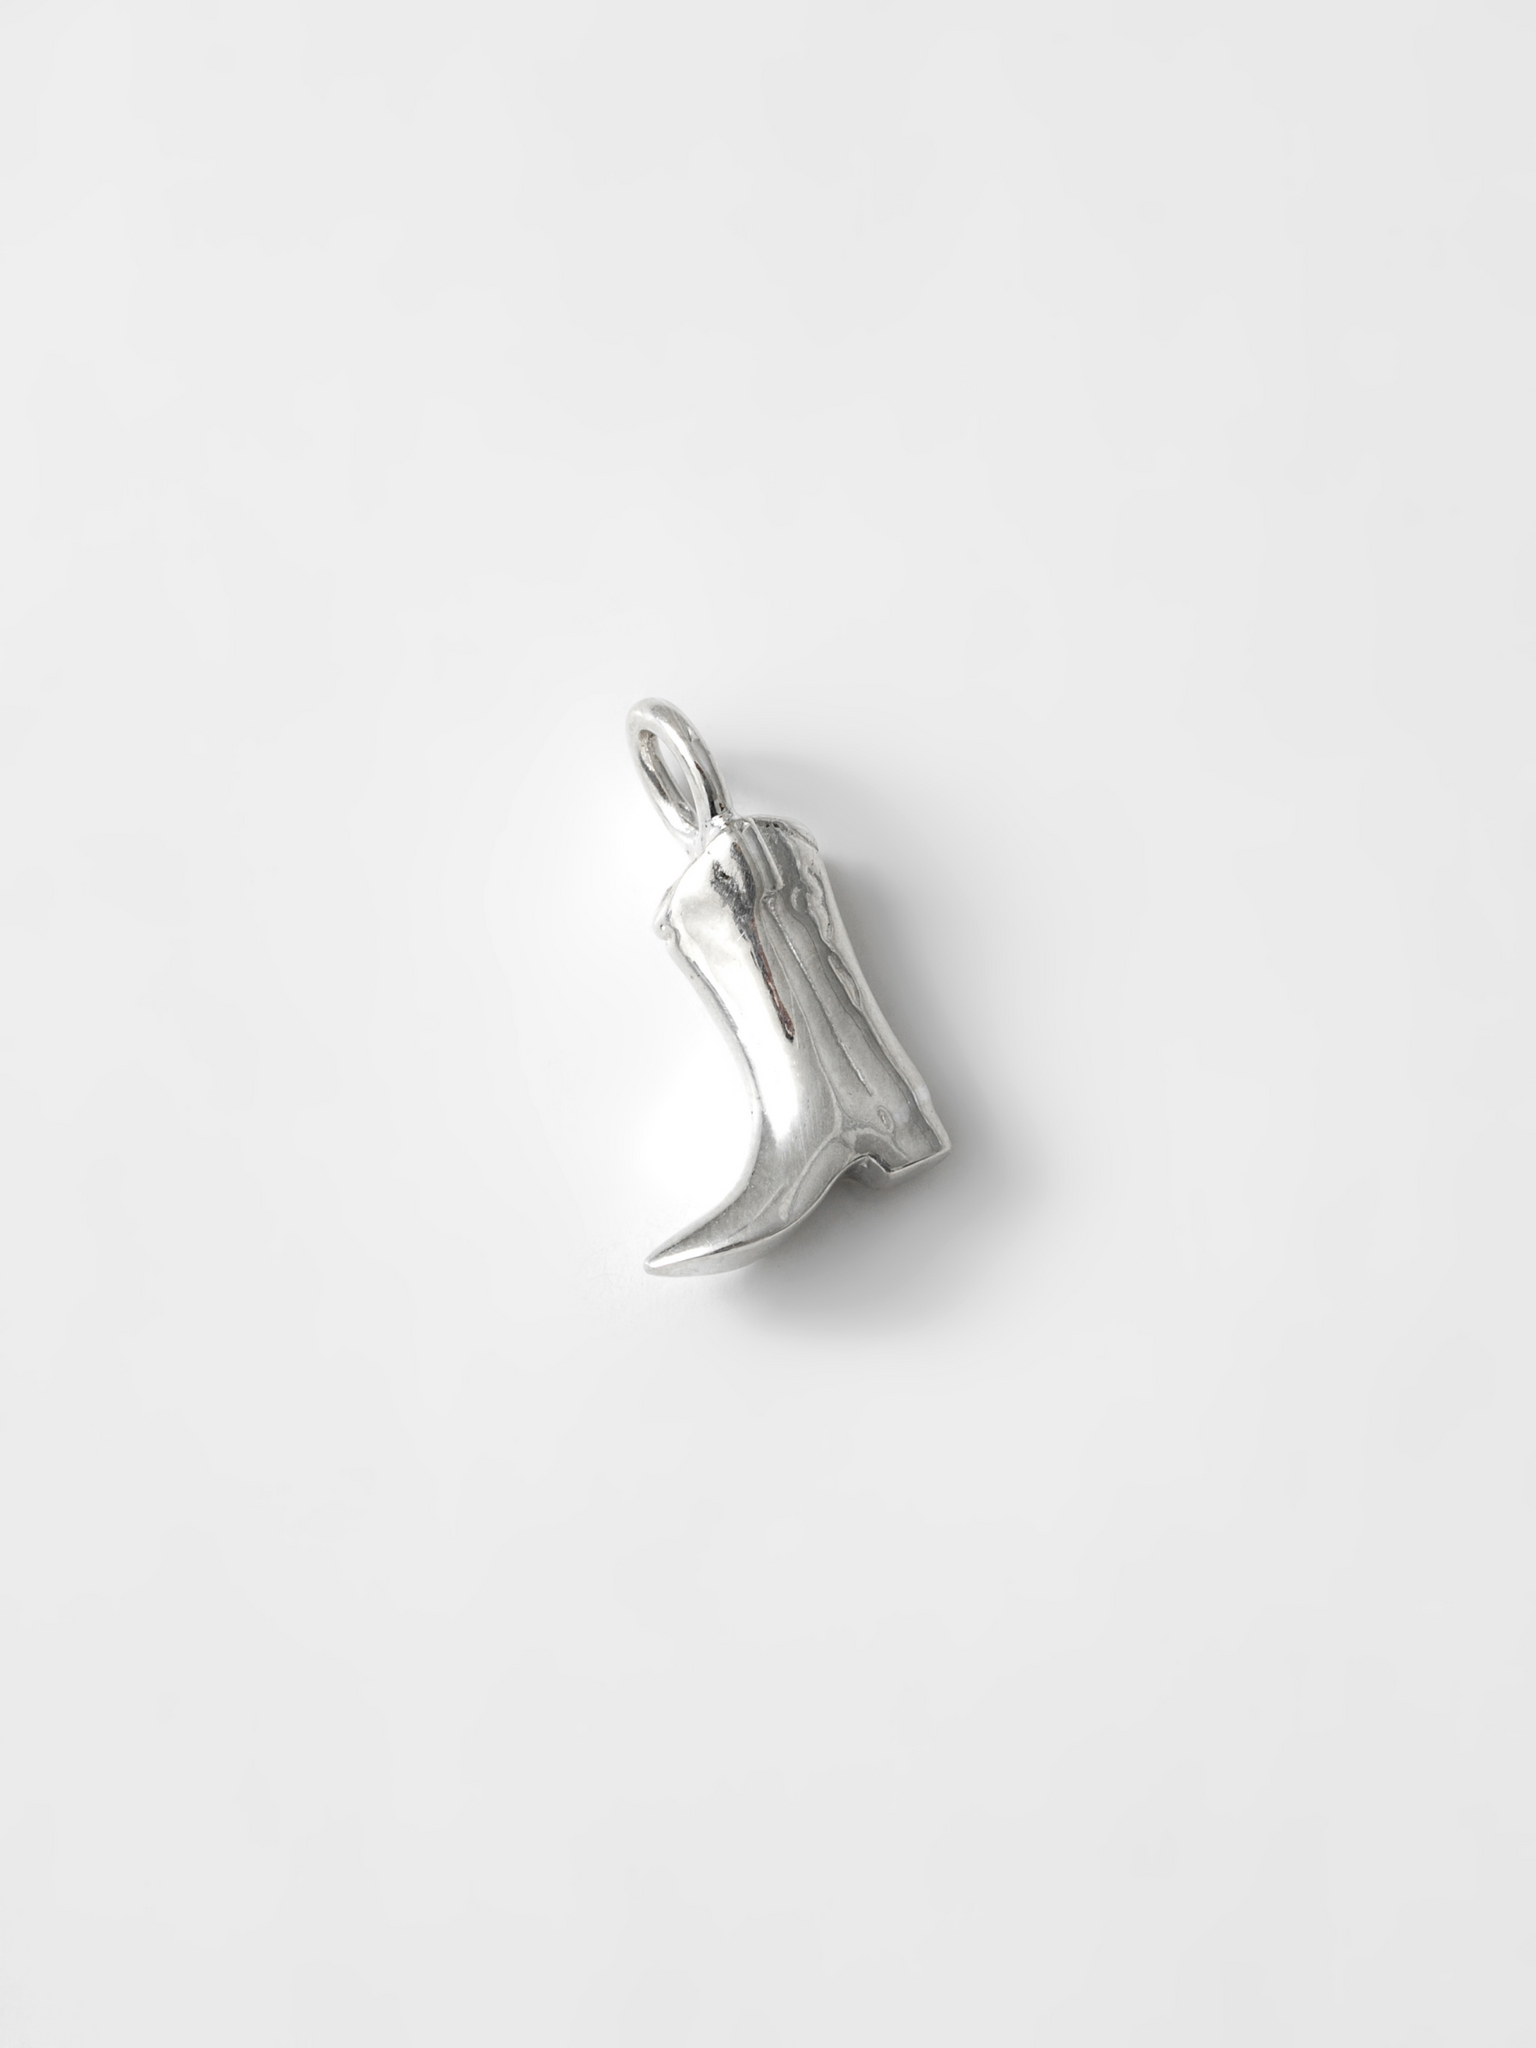 Mini Cowboy Boot Charm in Sterling Silver